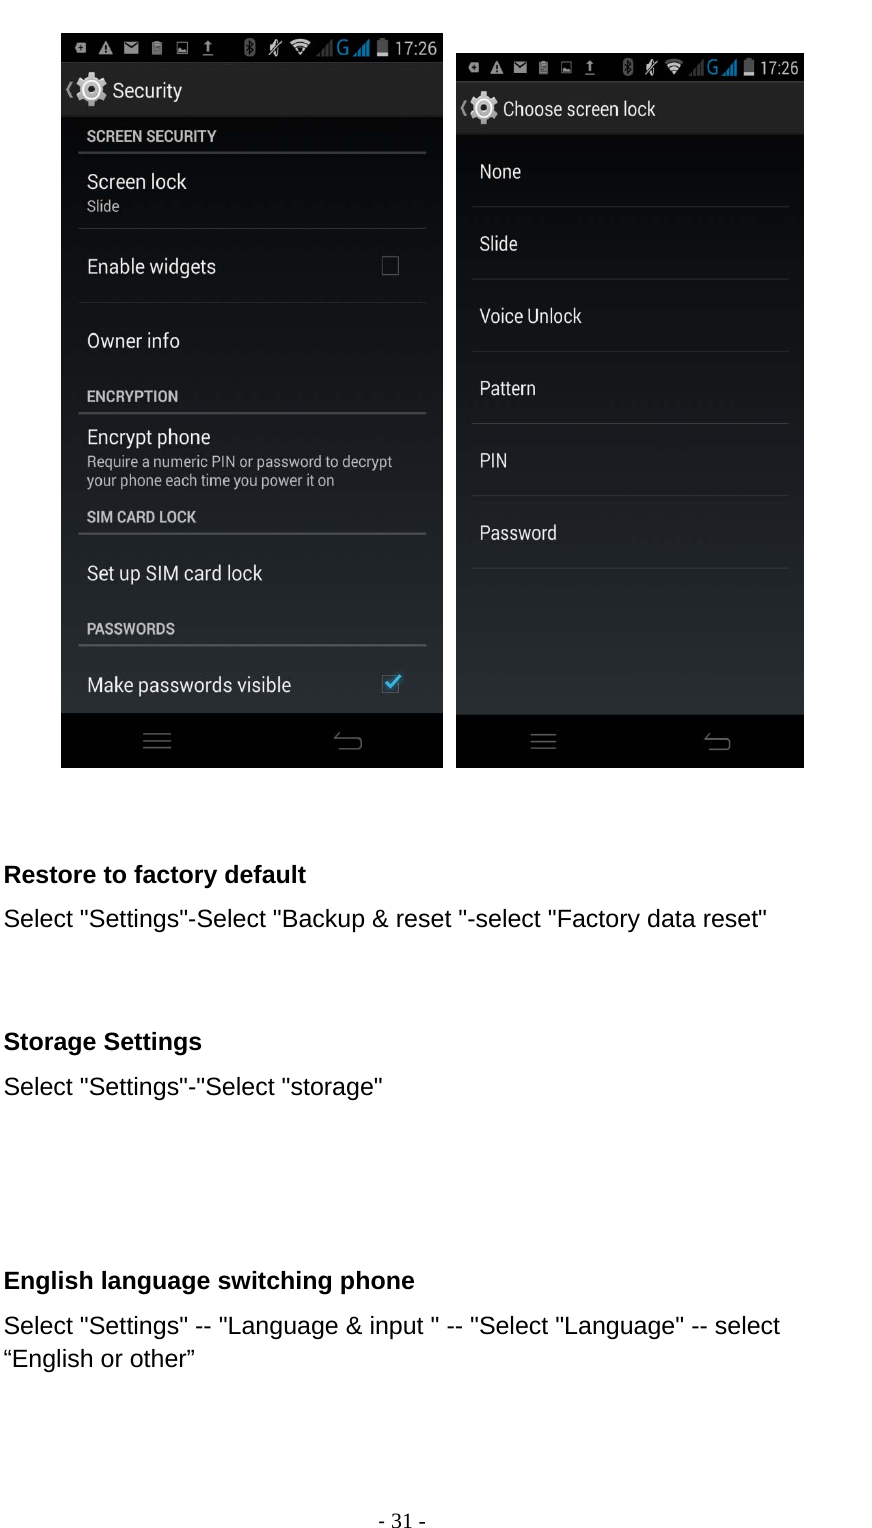                                          ‐ 31 -            Restore to factory default Select &quot;Settings&quot;-Select &quot;Backup &amp; reset &quot;-select &quot;Factory data reset&quot;         Storage Settings Select &quot;Settings&quot;-&quot;Select &quot;storage&quot;     English language switching phone Select &quot;Settings&quot; -- &quot;Language &amp; input &quot; -- &quot;Select &quot;Language&quot; -- select “English or other”      